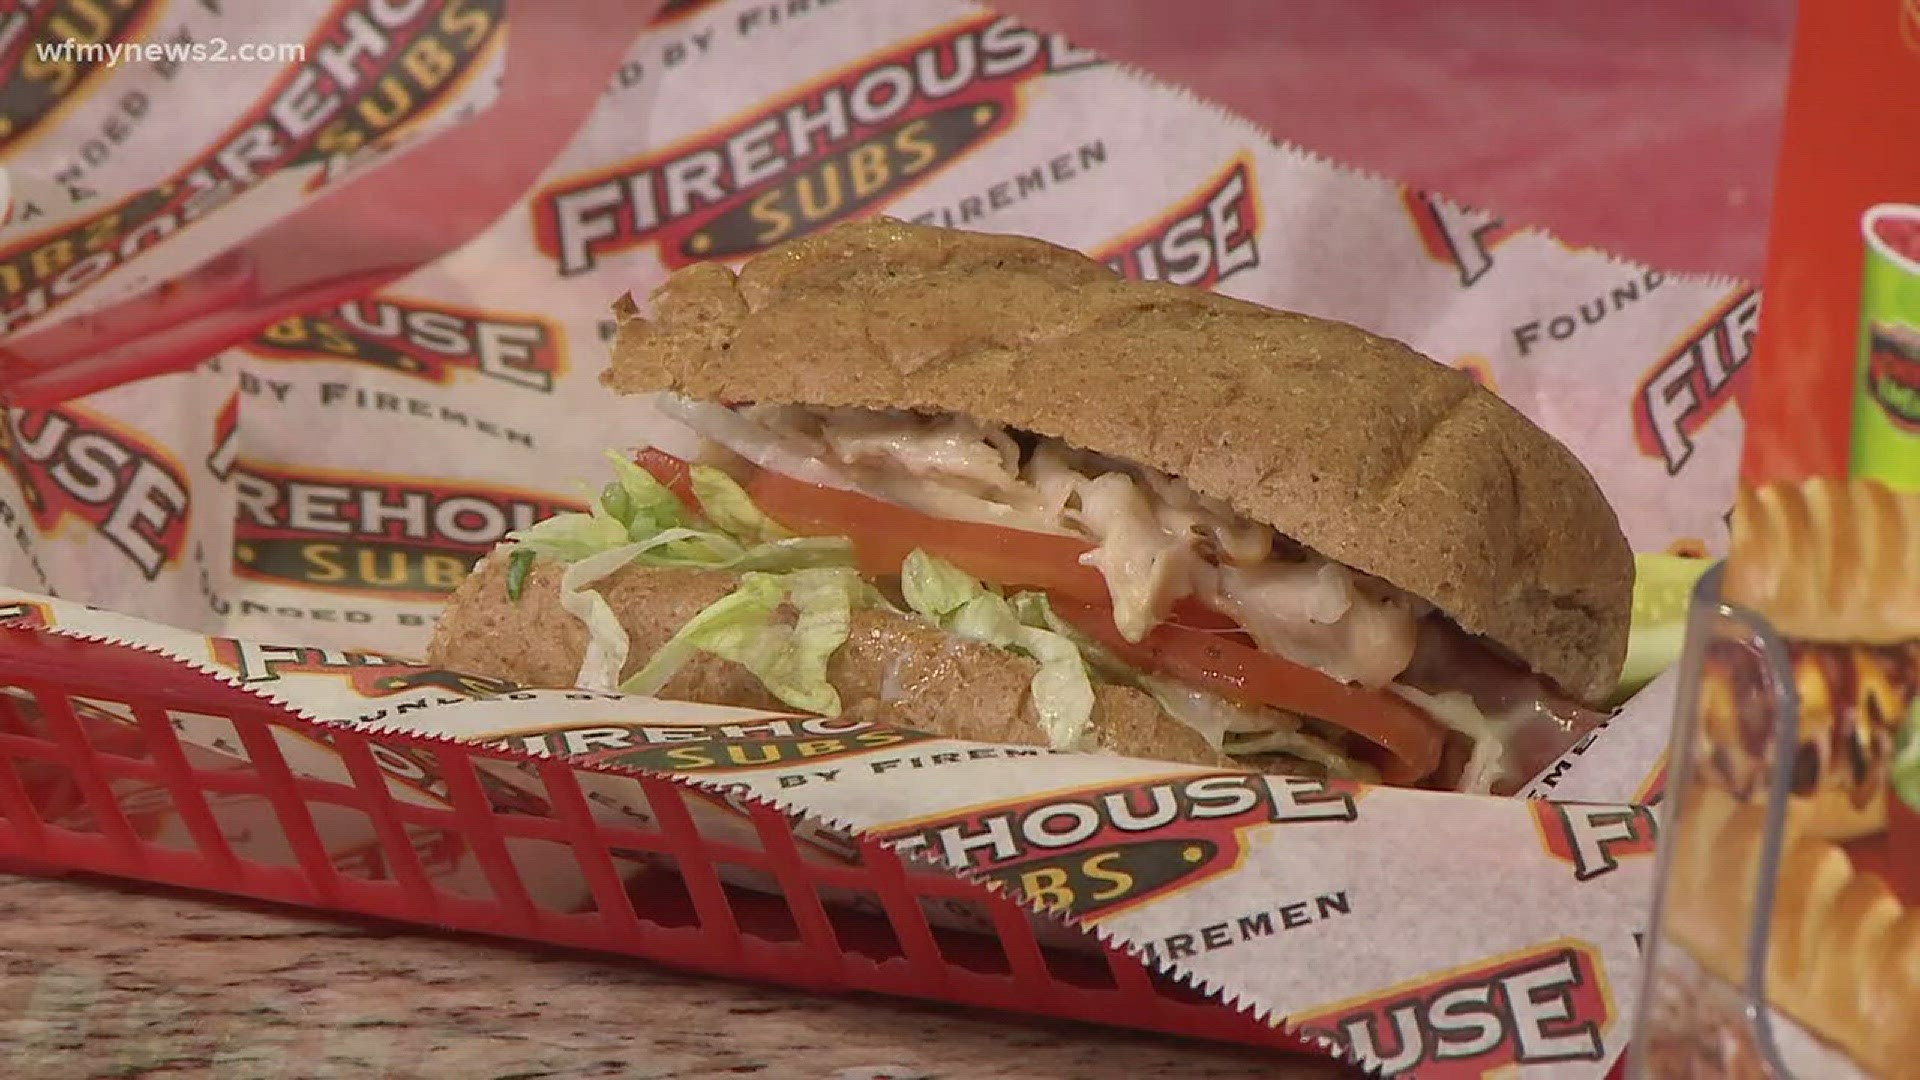 Making Sandwiches With Firehouse Subs Part 2